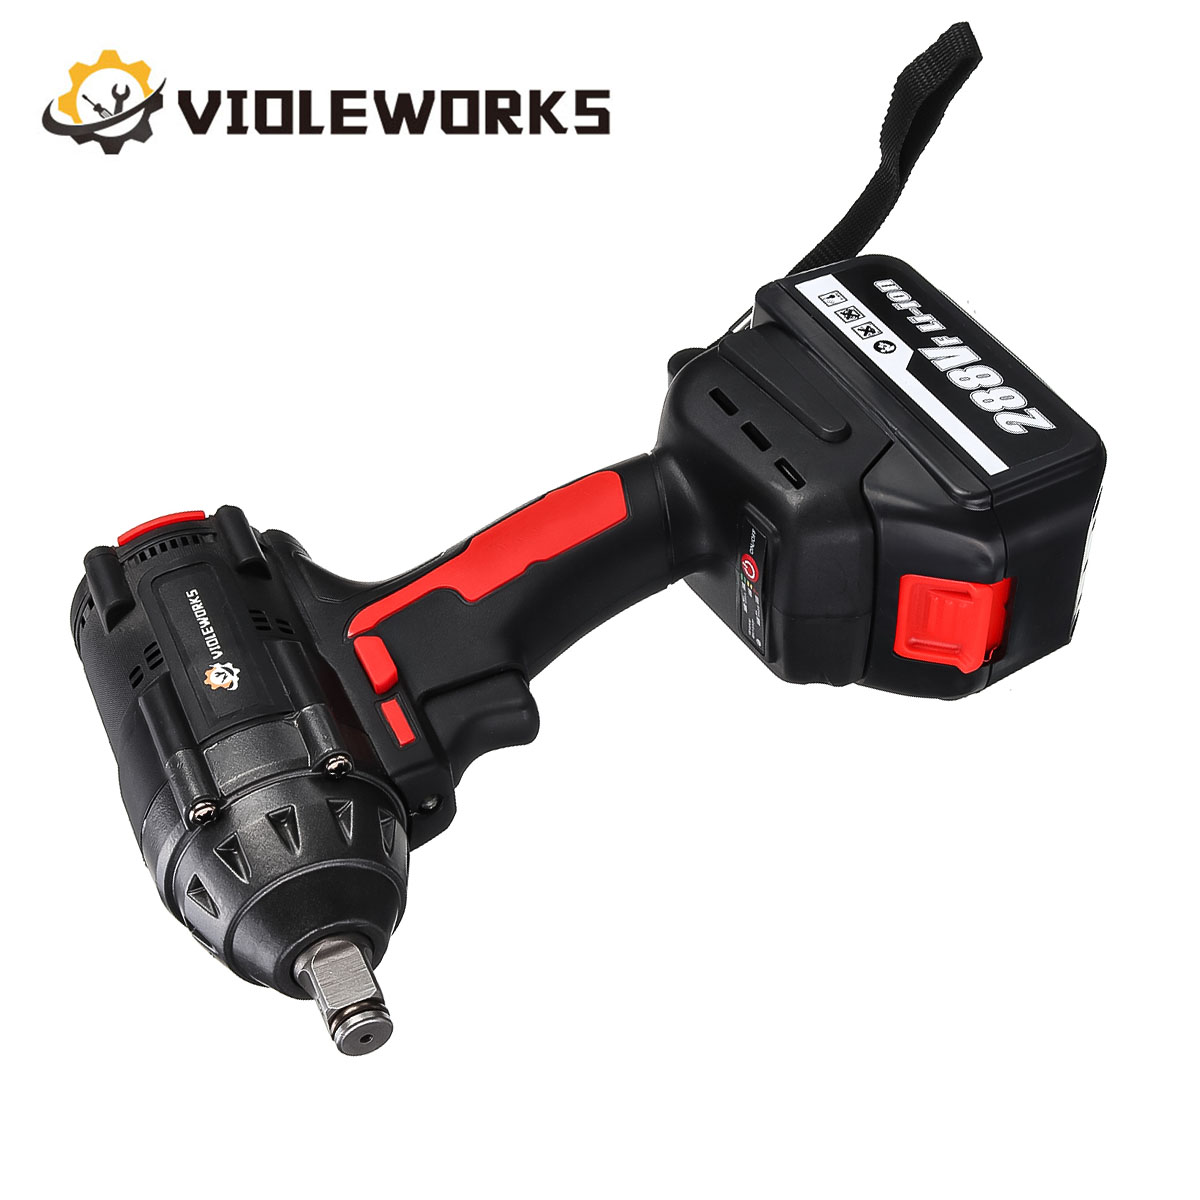 VIOLEWORKS-288VF-12Inch-520NM-Max-Brushless-Impact-Wrench-Li-ion-Electric-Wrench-W-210-Battery-Also--1845741-10